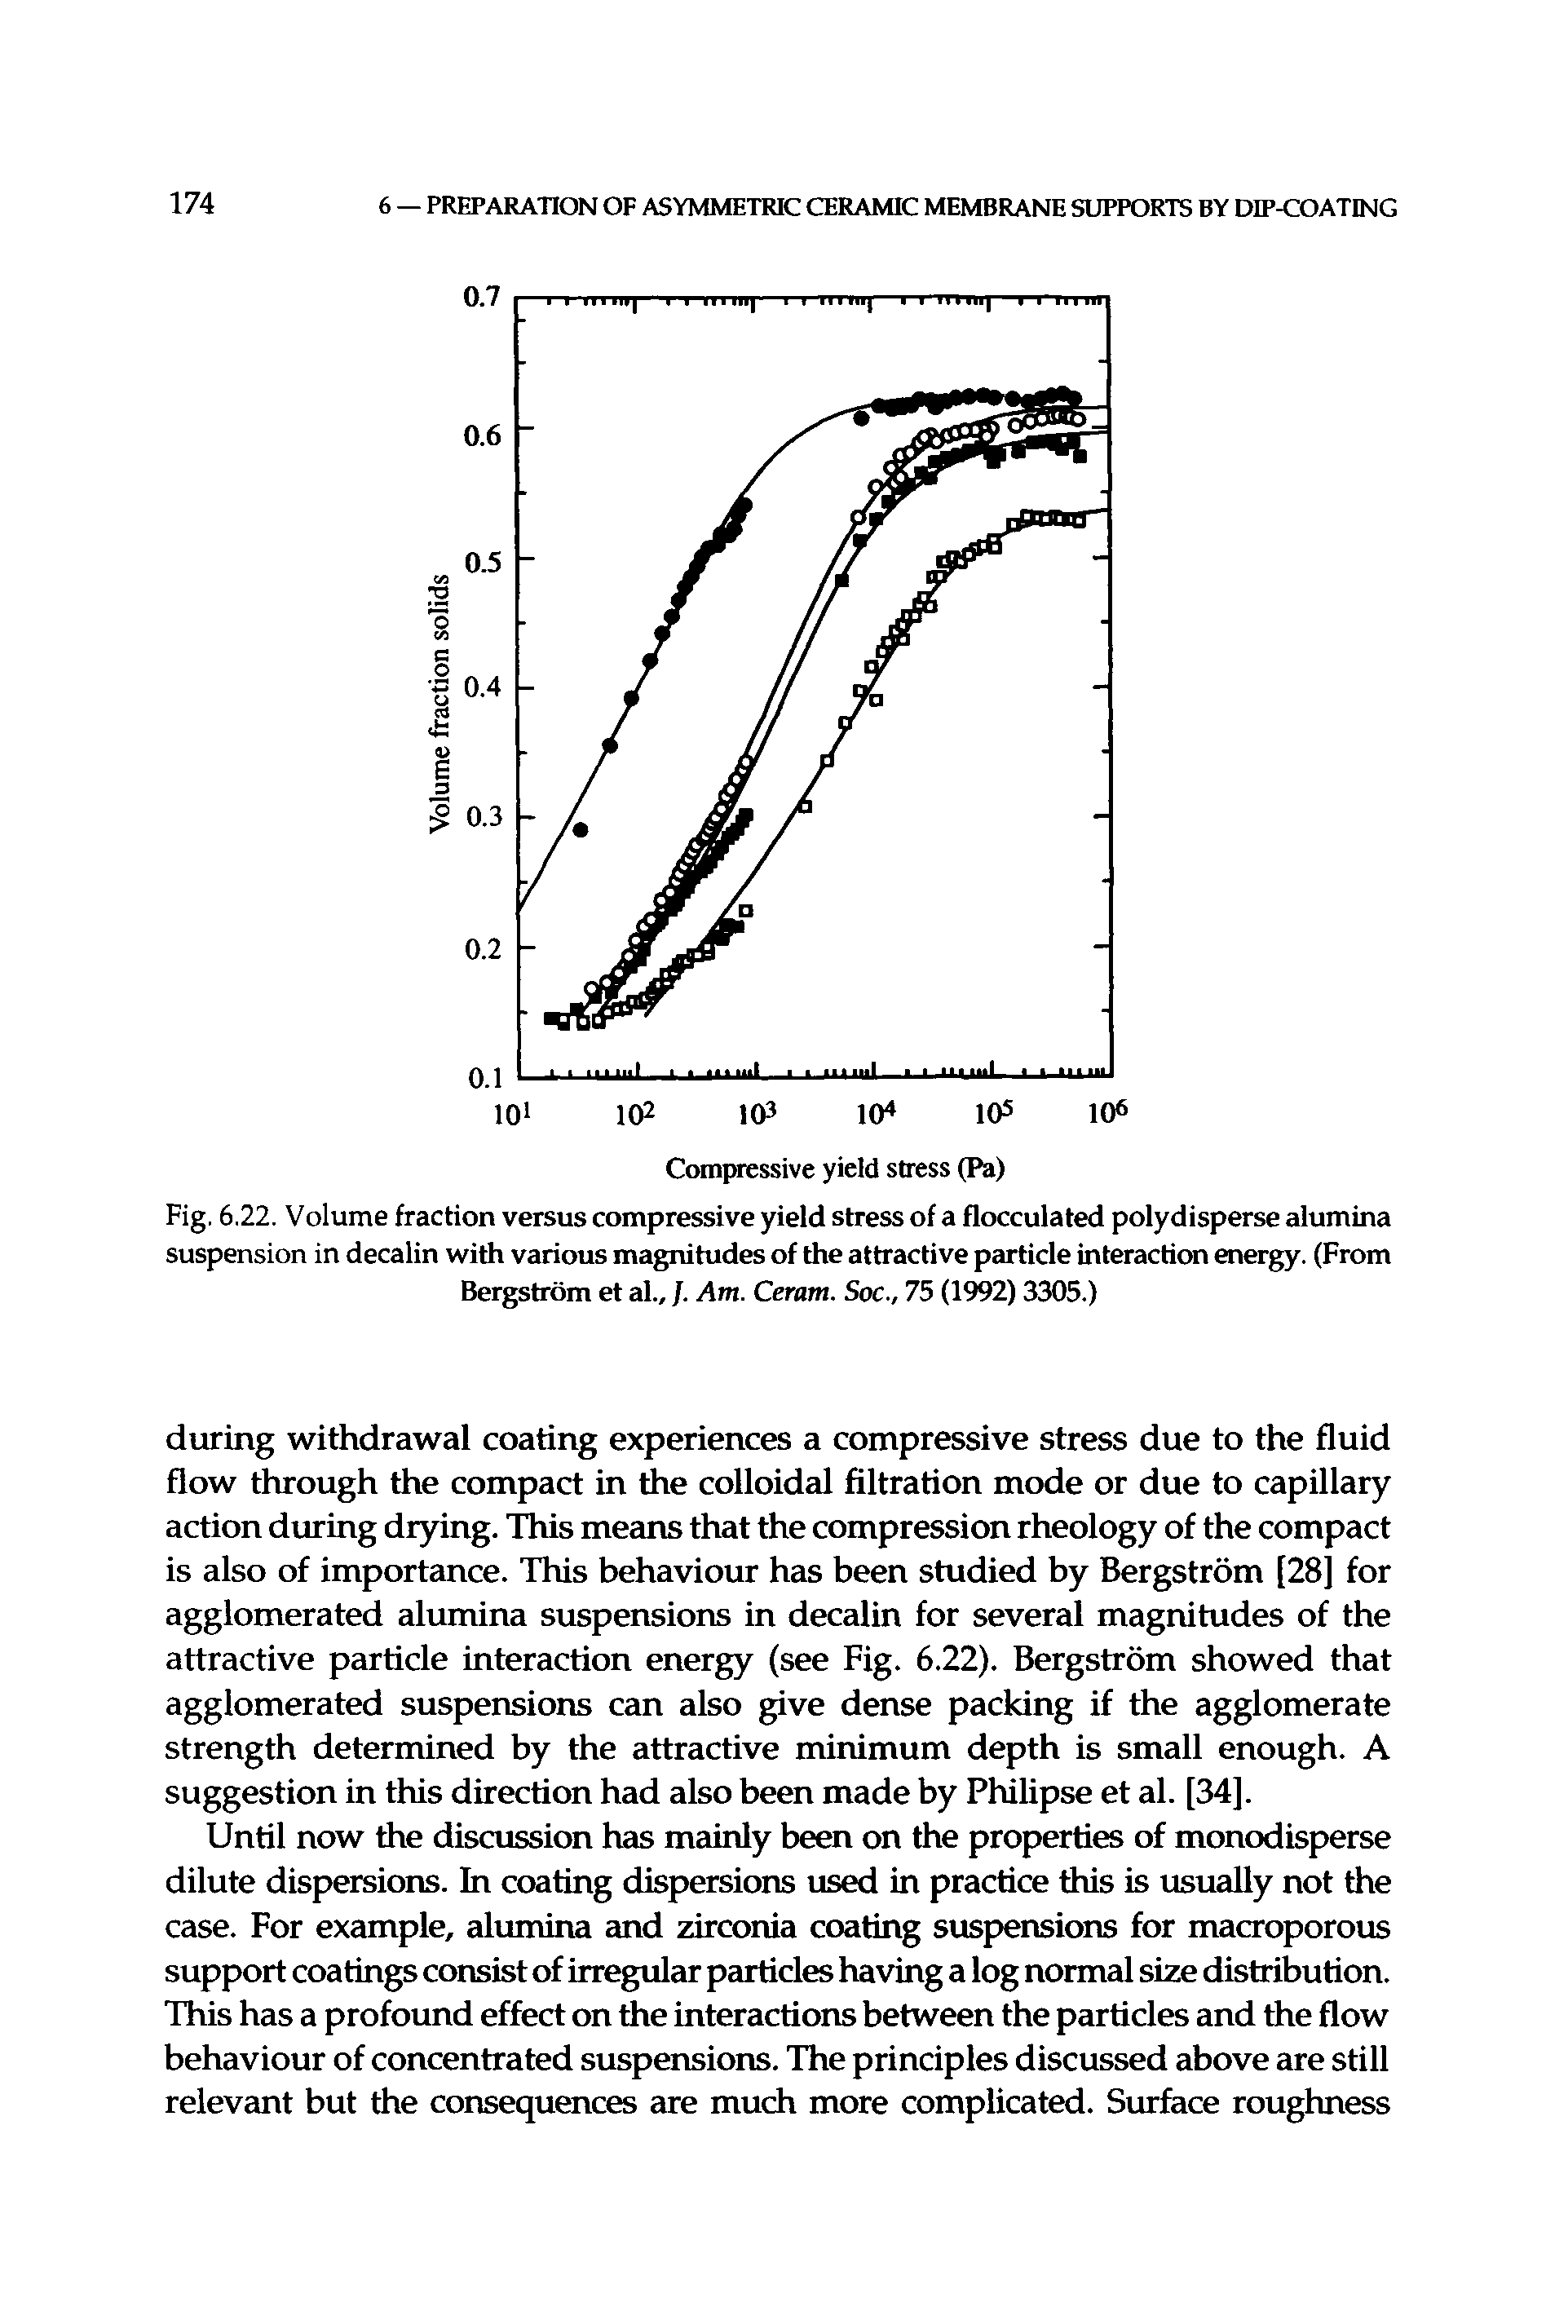 Fig. 6.22. Volume fraction versus compressive yield stress of a flocculated polydisperse alumina suspension in decalin with various magnitudes of the attractive particle interaction energy. (From Bergstrom et al., /. Am. Ceram. Soc., 75 (1992) 3305.)...